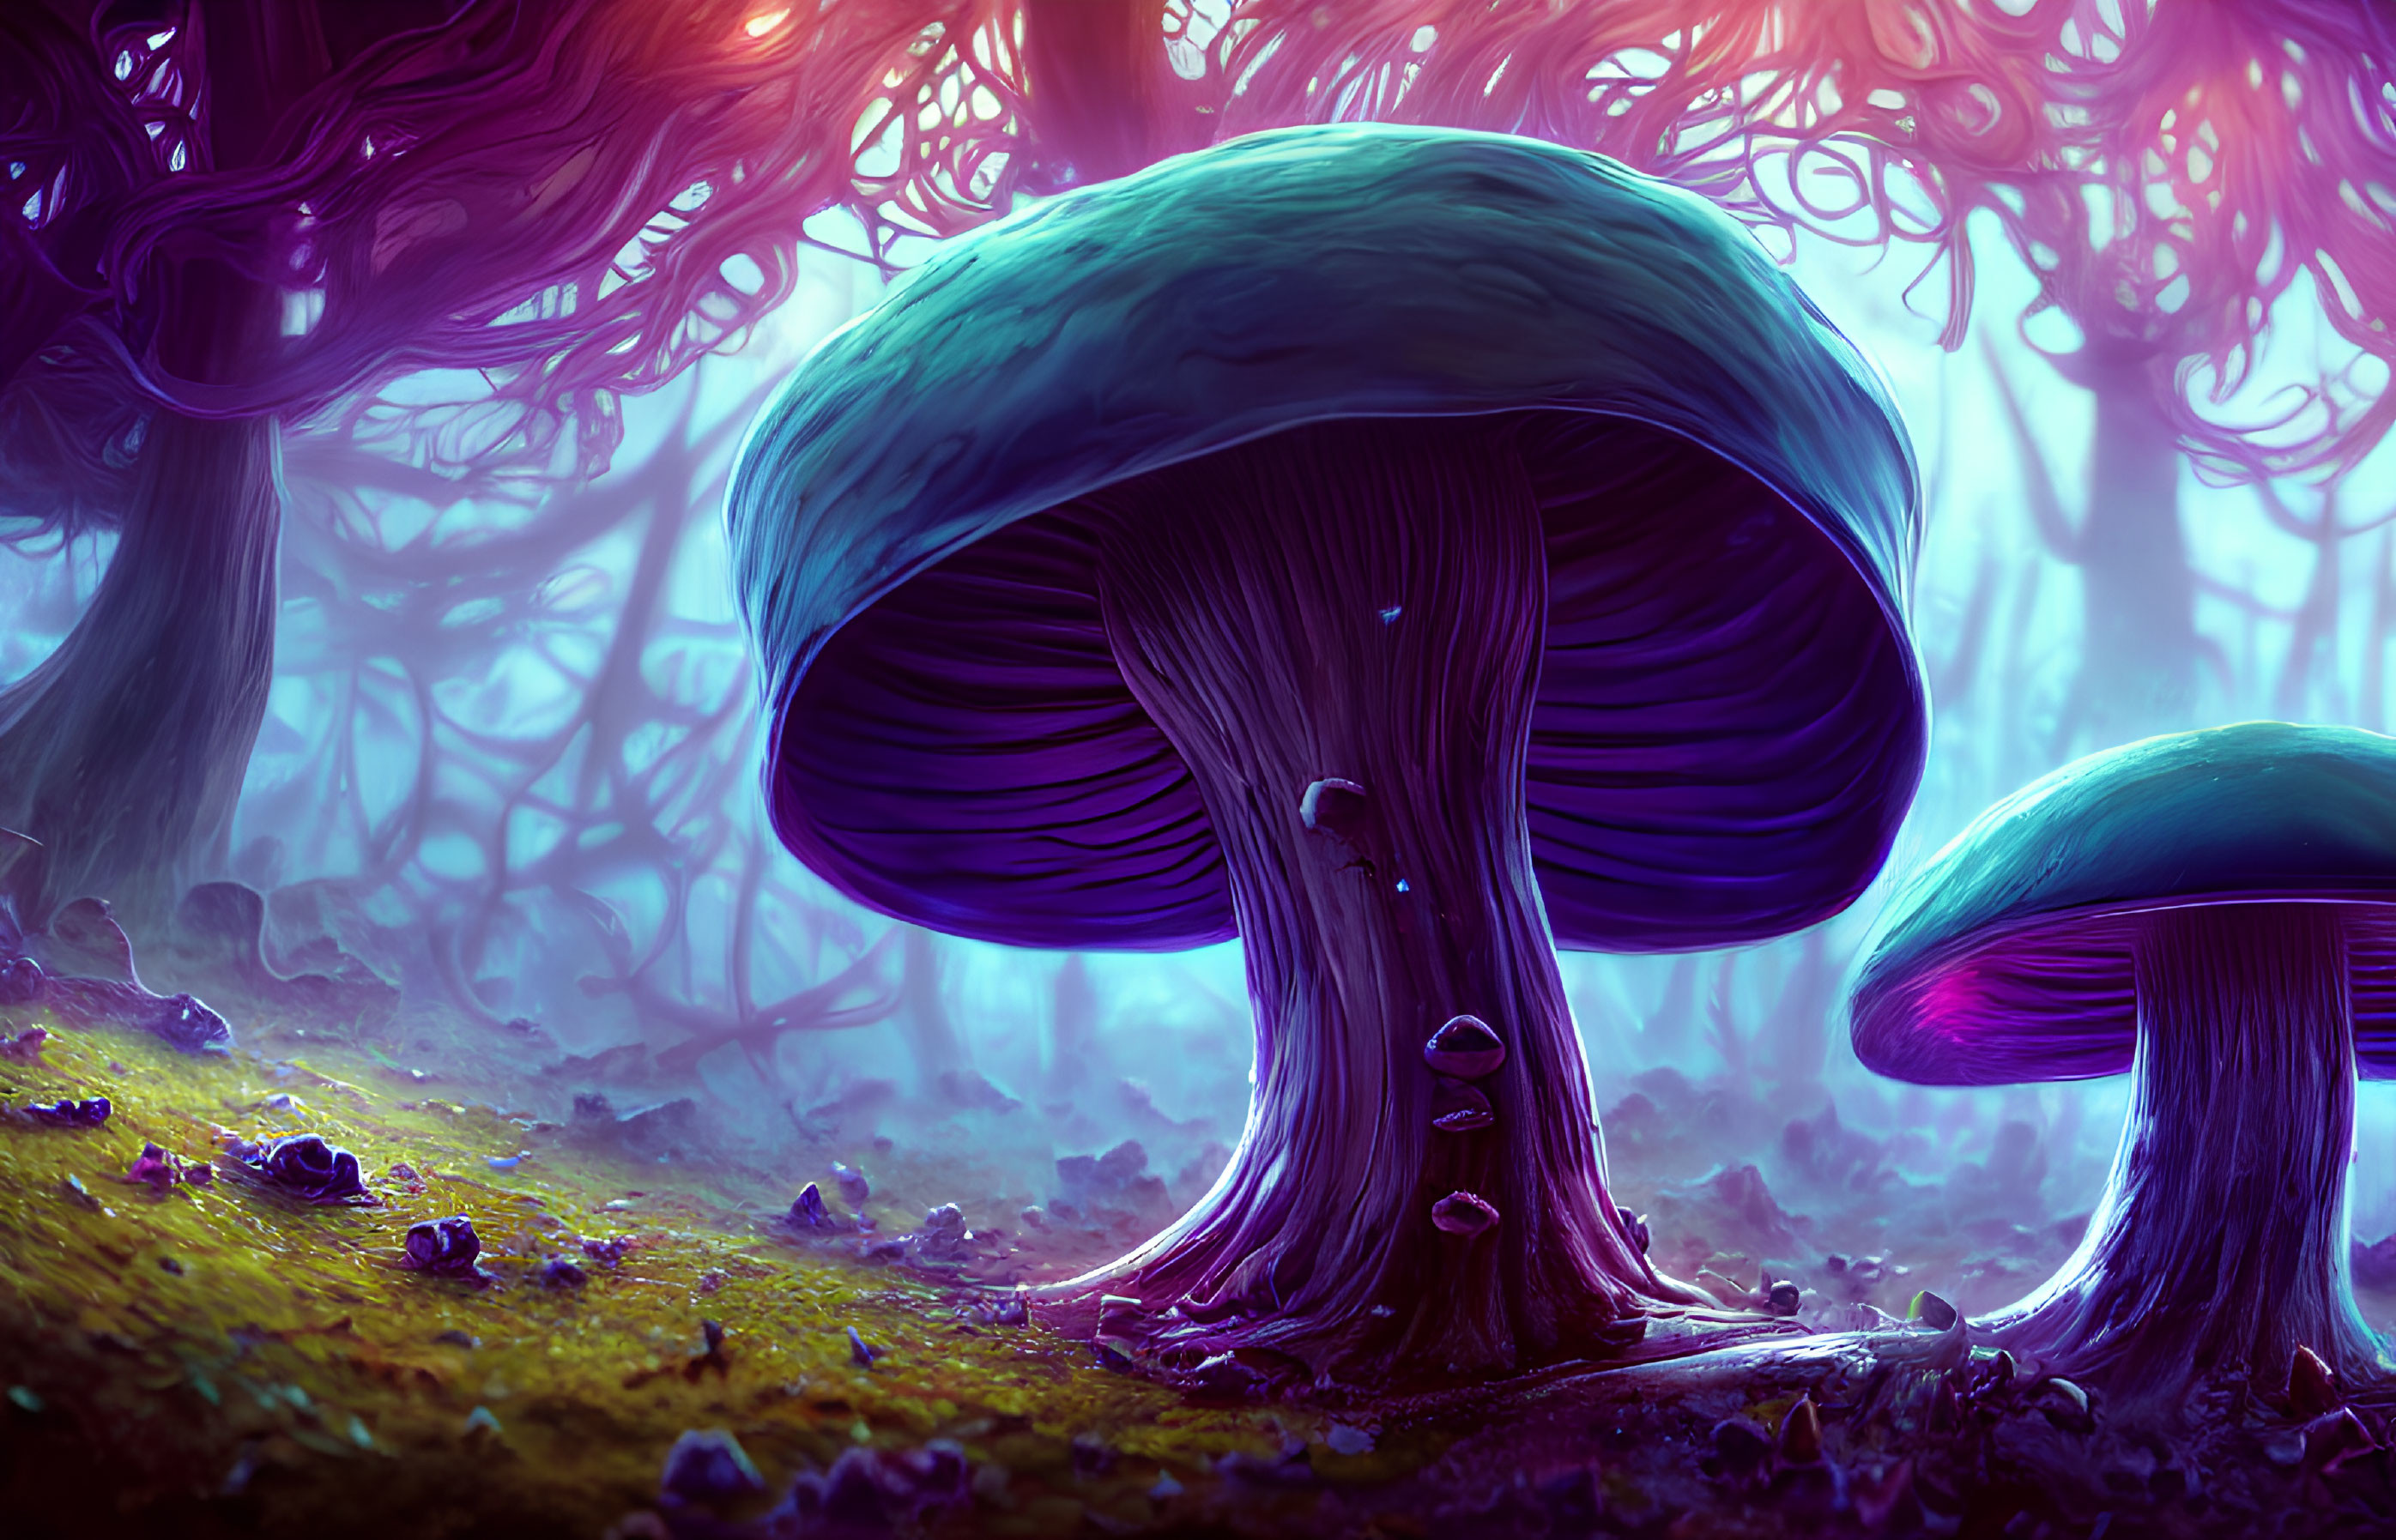 Fantastical forest scene with oversized purple and blue mushrooms and mystical purple haze